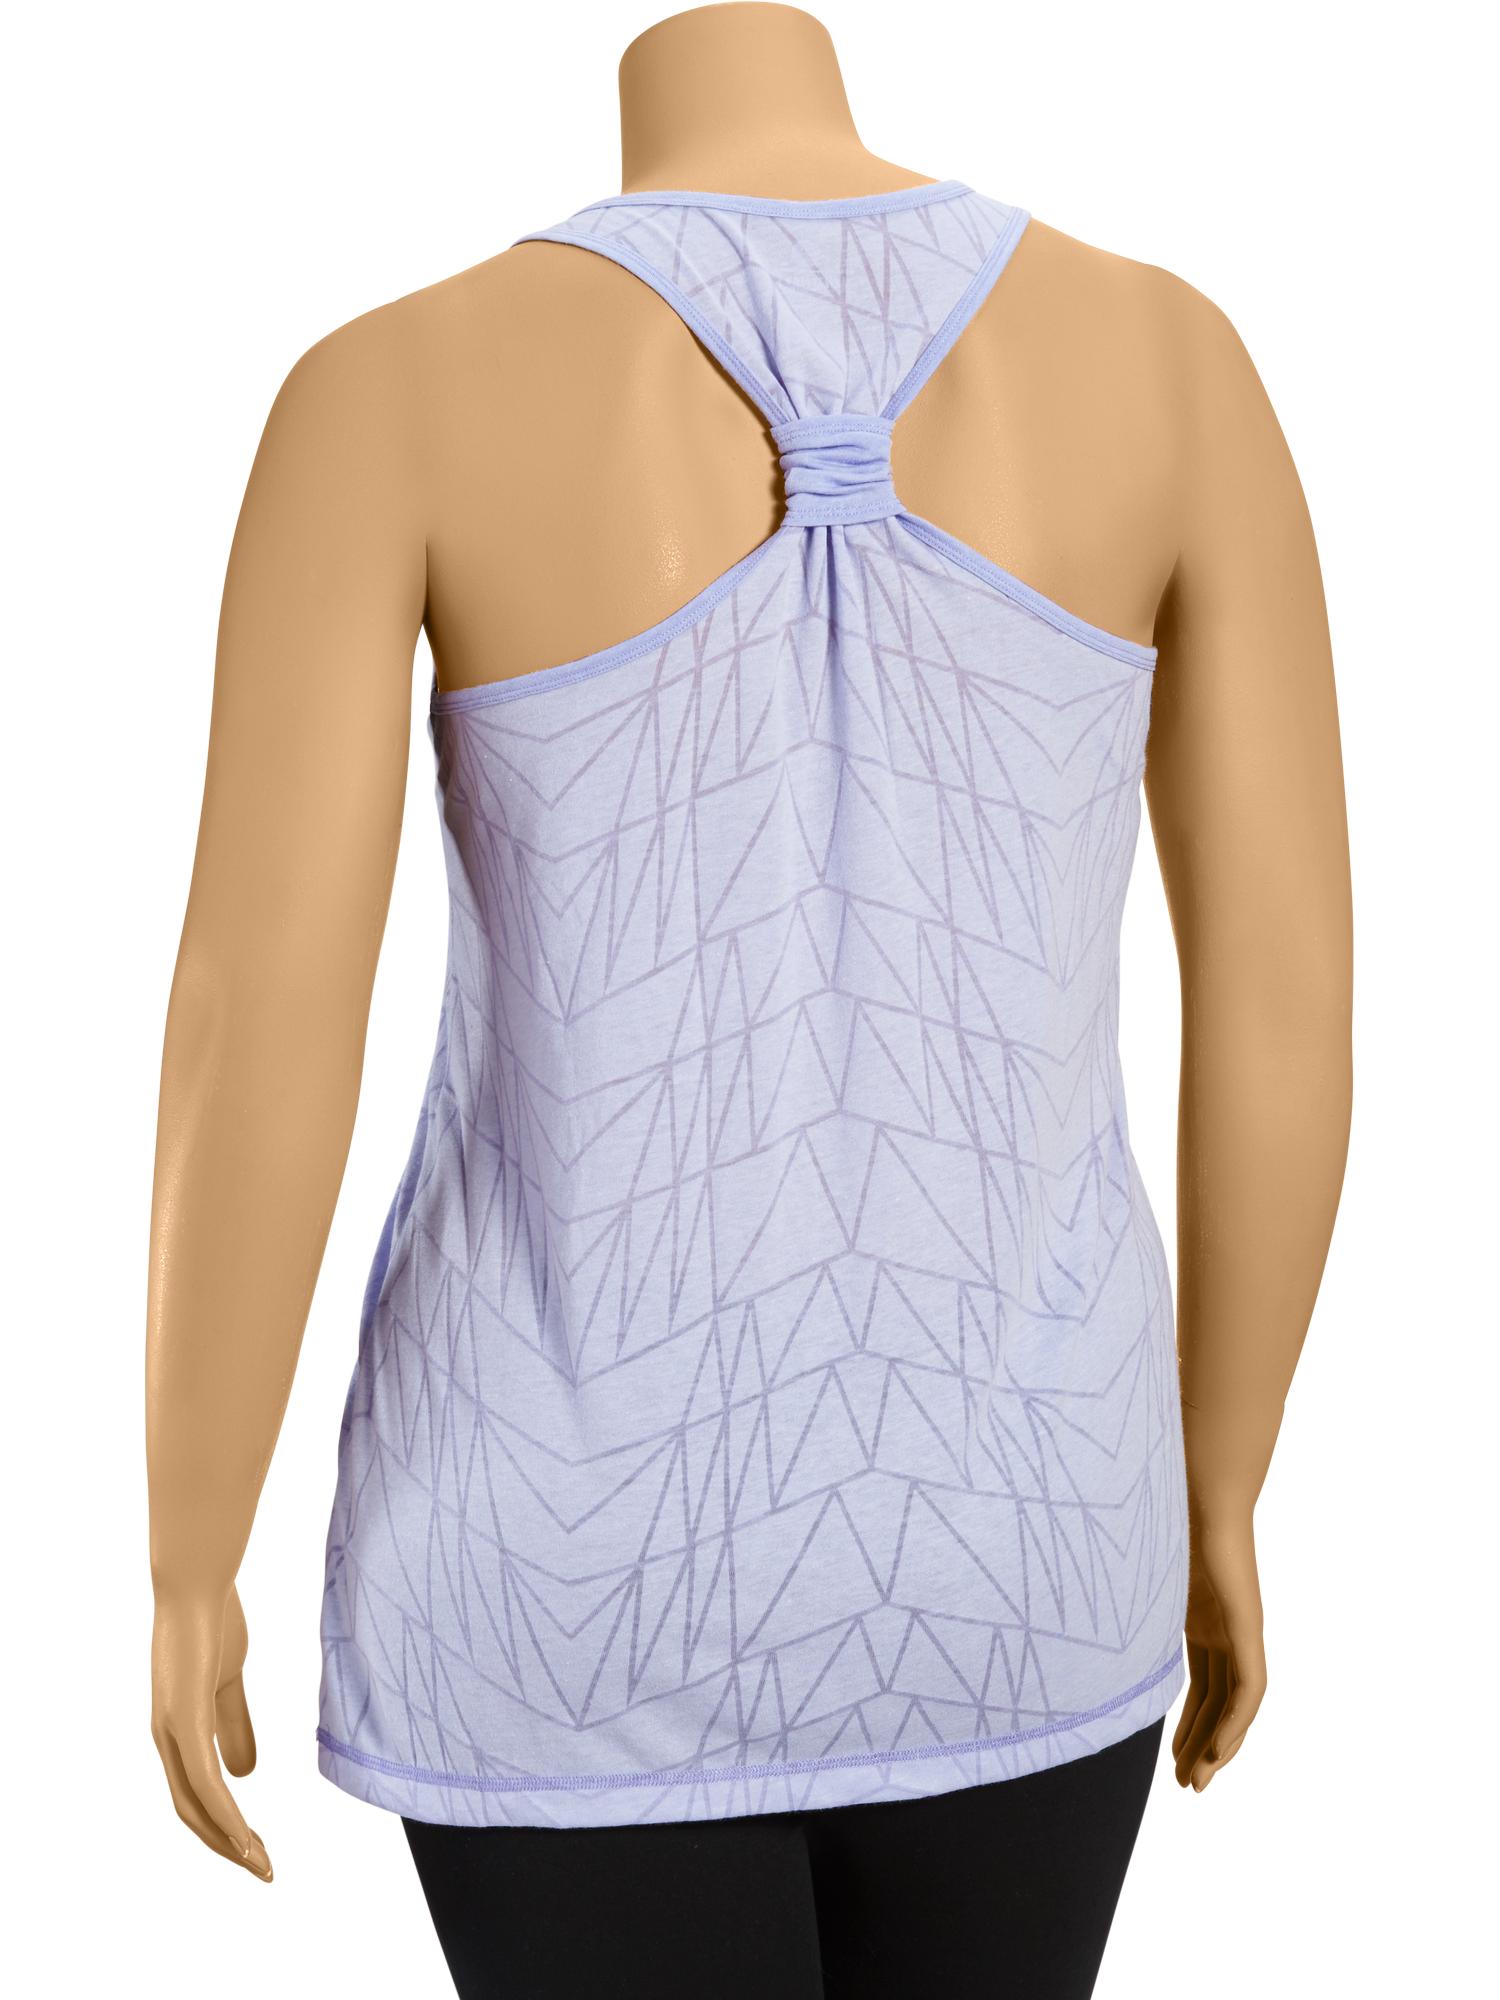 Women's Plus Active Compression Tank by Old Navy • THE PLUS-SIZE